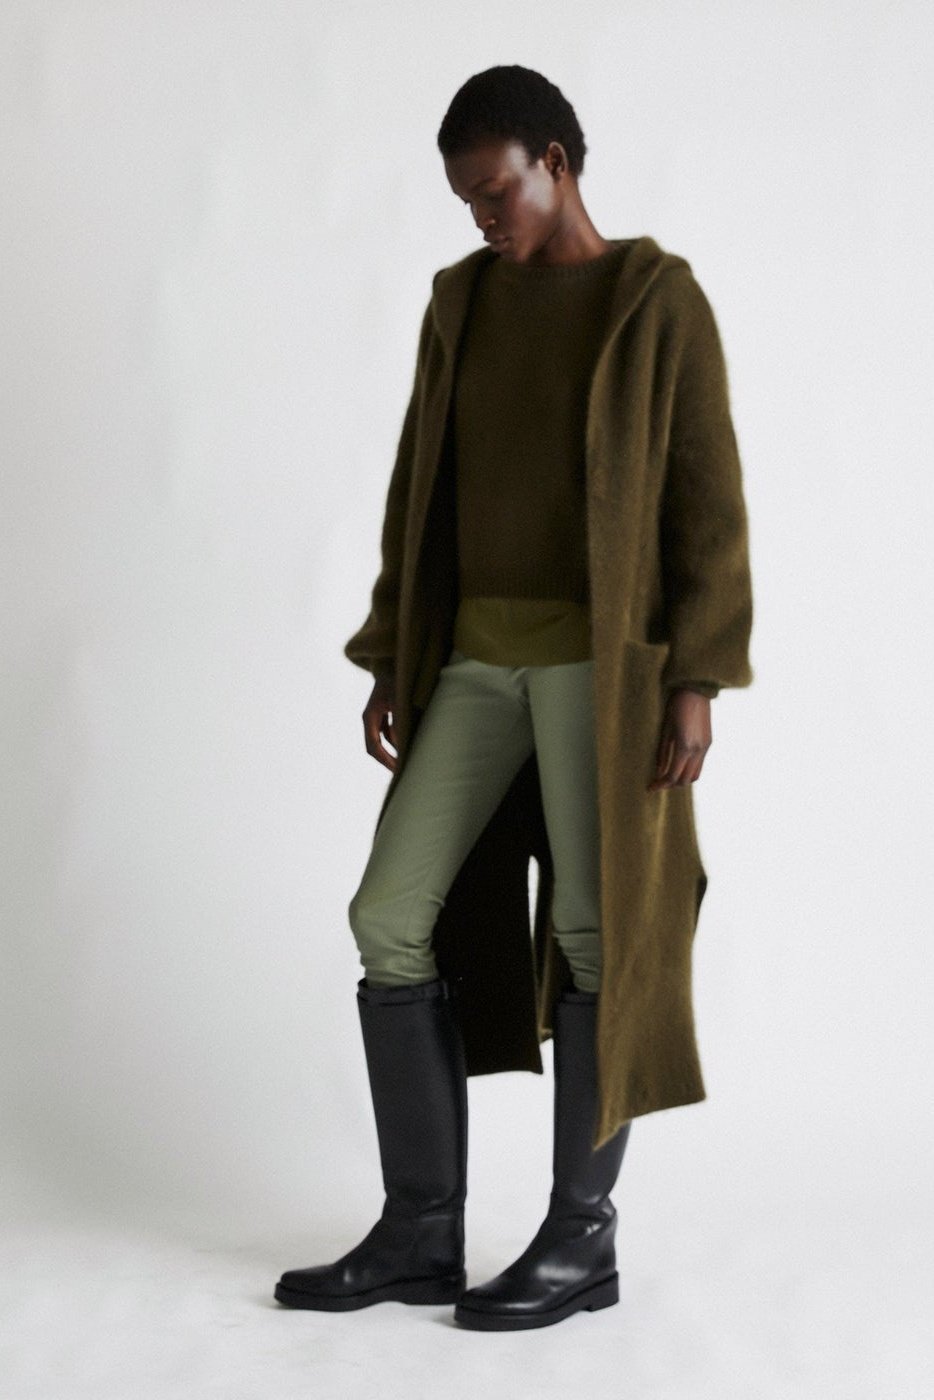 + Beryll Pure Cashmere Coat with Hood | Kelp Green - +Beryll Cashmere Coat with Hood | Kelp Green - +Beryll Worn By Good People